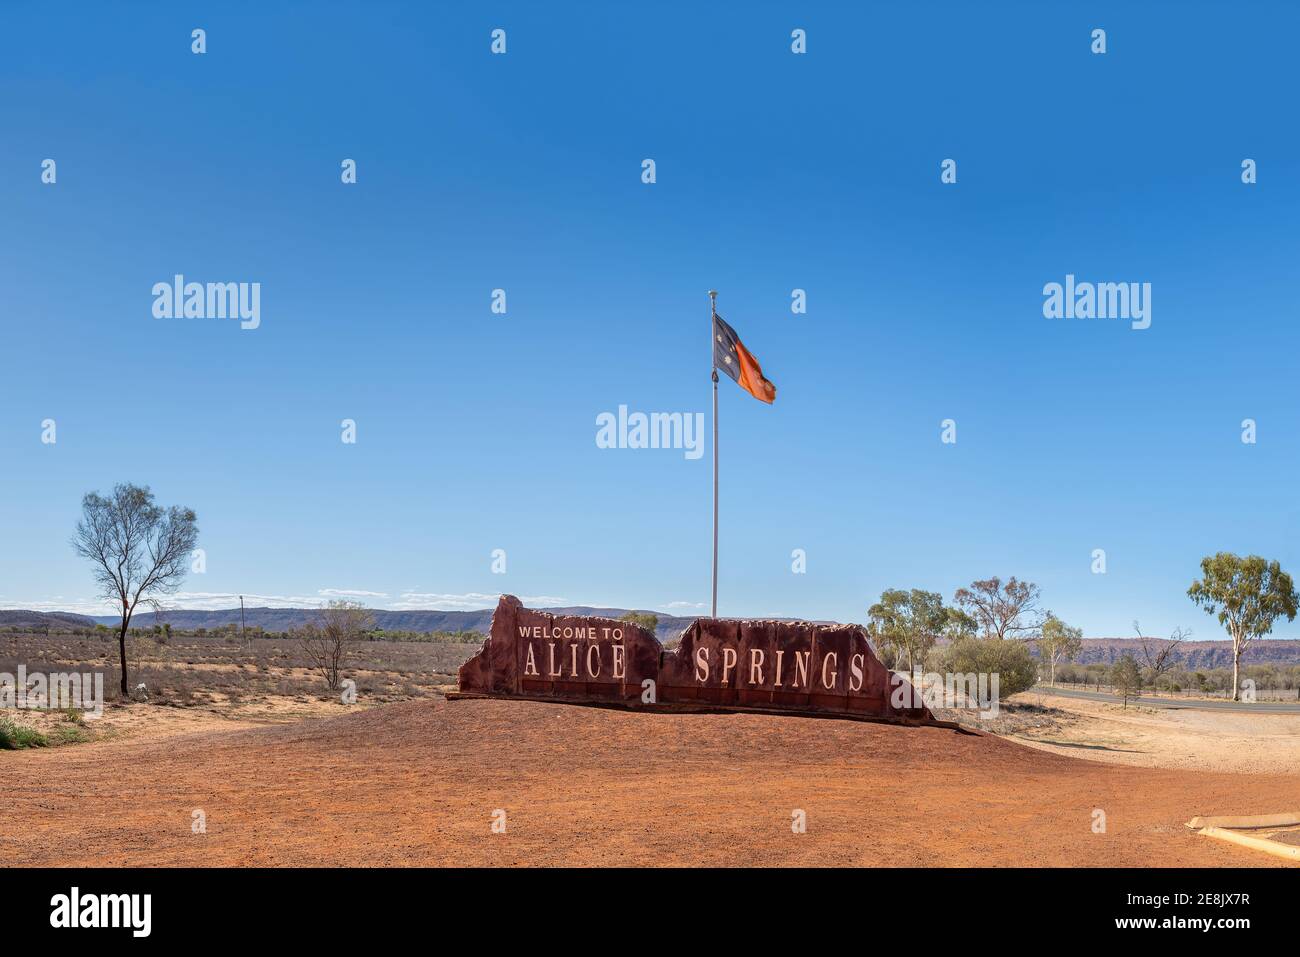 Alice Springs, Northern Territory, Australia; January 18, 2021 - A sign on the outskirts of Alice Springs in the Northern Territory of Australia. Stock Photo